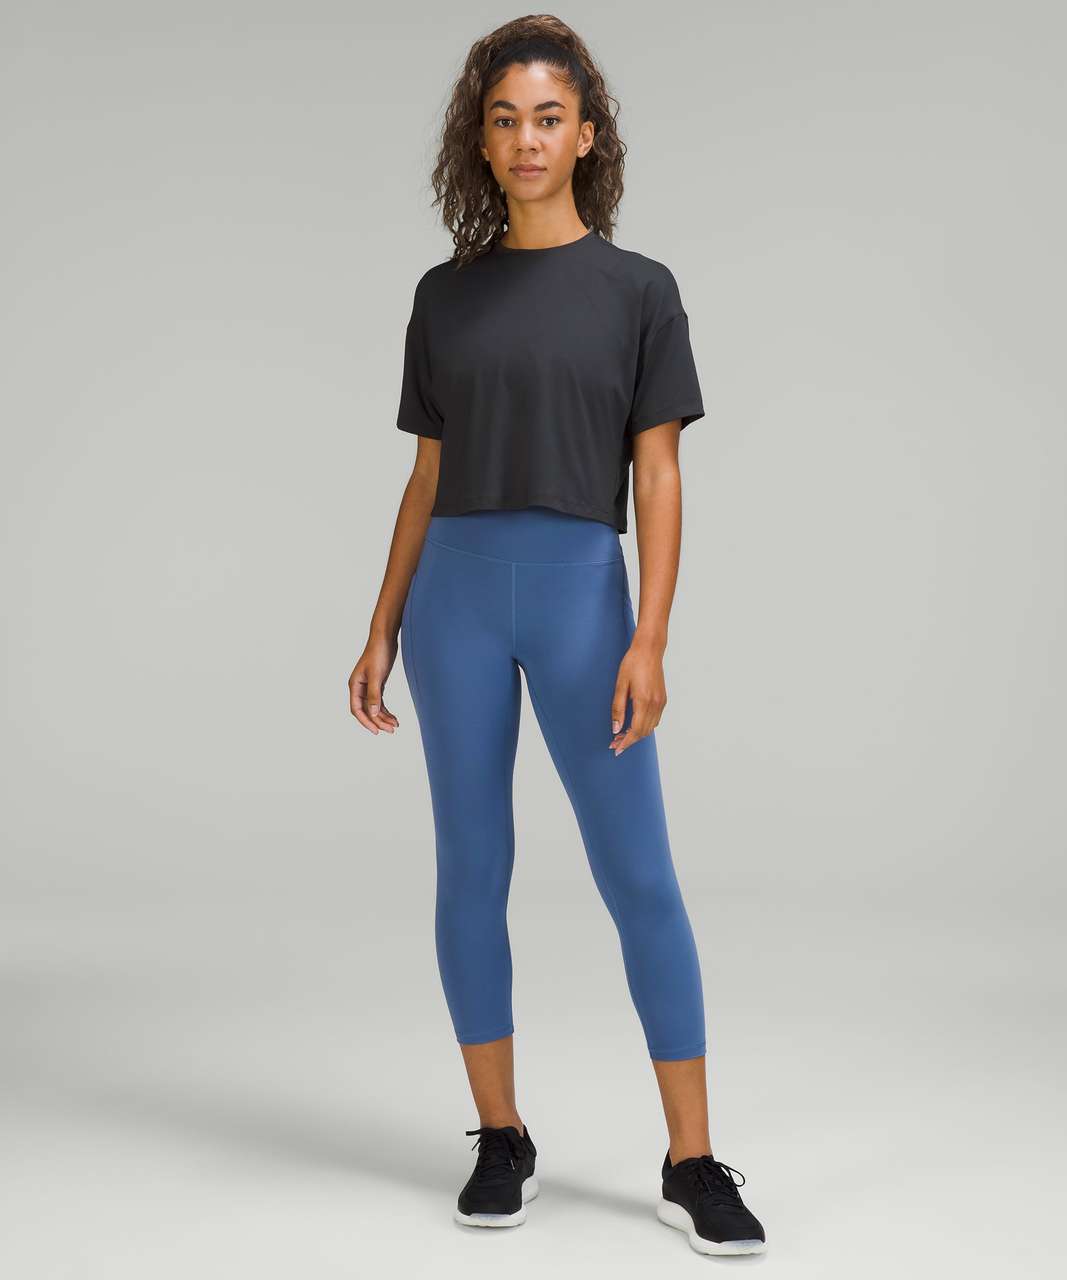 Lululemon Wunder Train High-Rise Crop with Pockets 23" - Water Drop